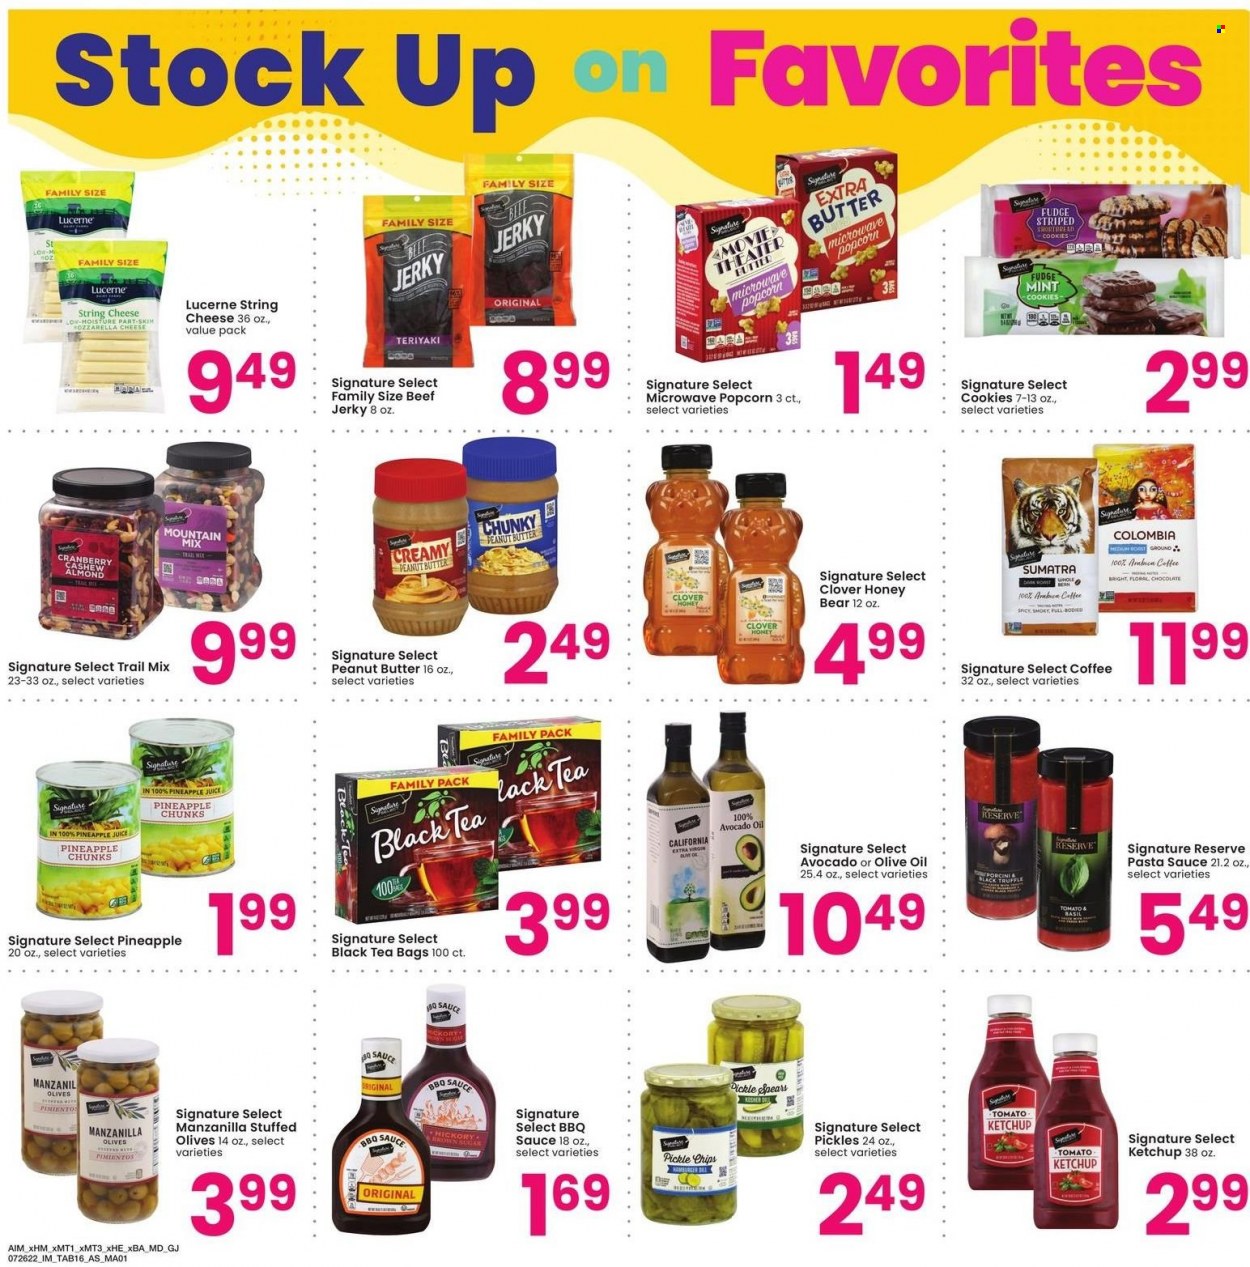 thumbnail - Albertsons Flyer - 07/26/2022 - 08/29/2022 - Sales products - pineapple, pasta sauce, hamburger, sauce, beef jerky, jerky, string cheese, cheese, cookies, fudge, chocolate, chips, popcorn, cane sugar, pickles, olives, dill, BBQ sauce, ketchup, avocado oil, olive oil, oil, honey, peanut butter, trail mix, pineapple juice, juice, tea bags, coffee. Page 16.